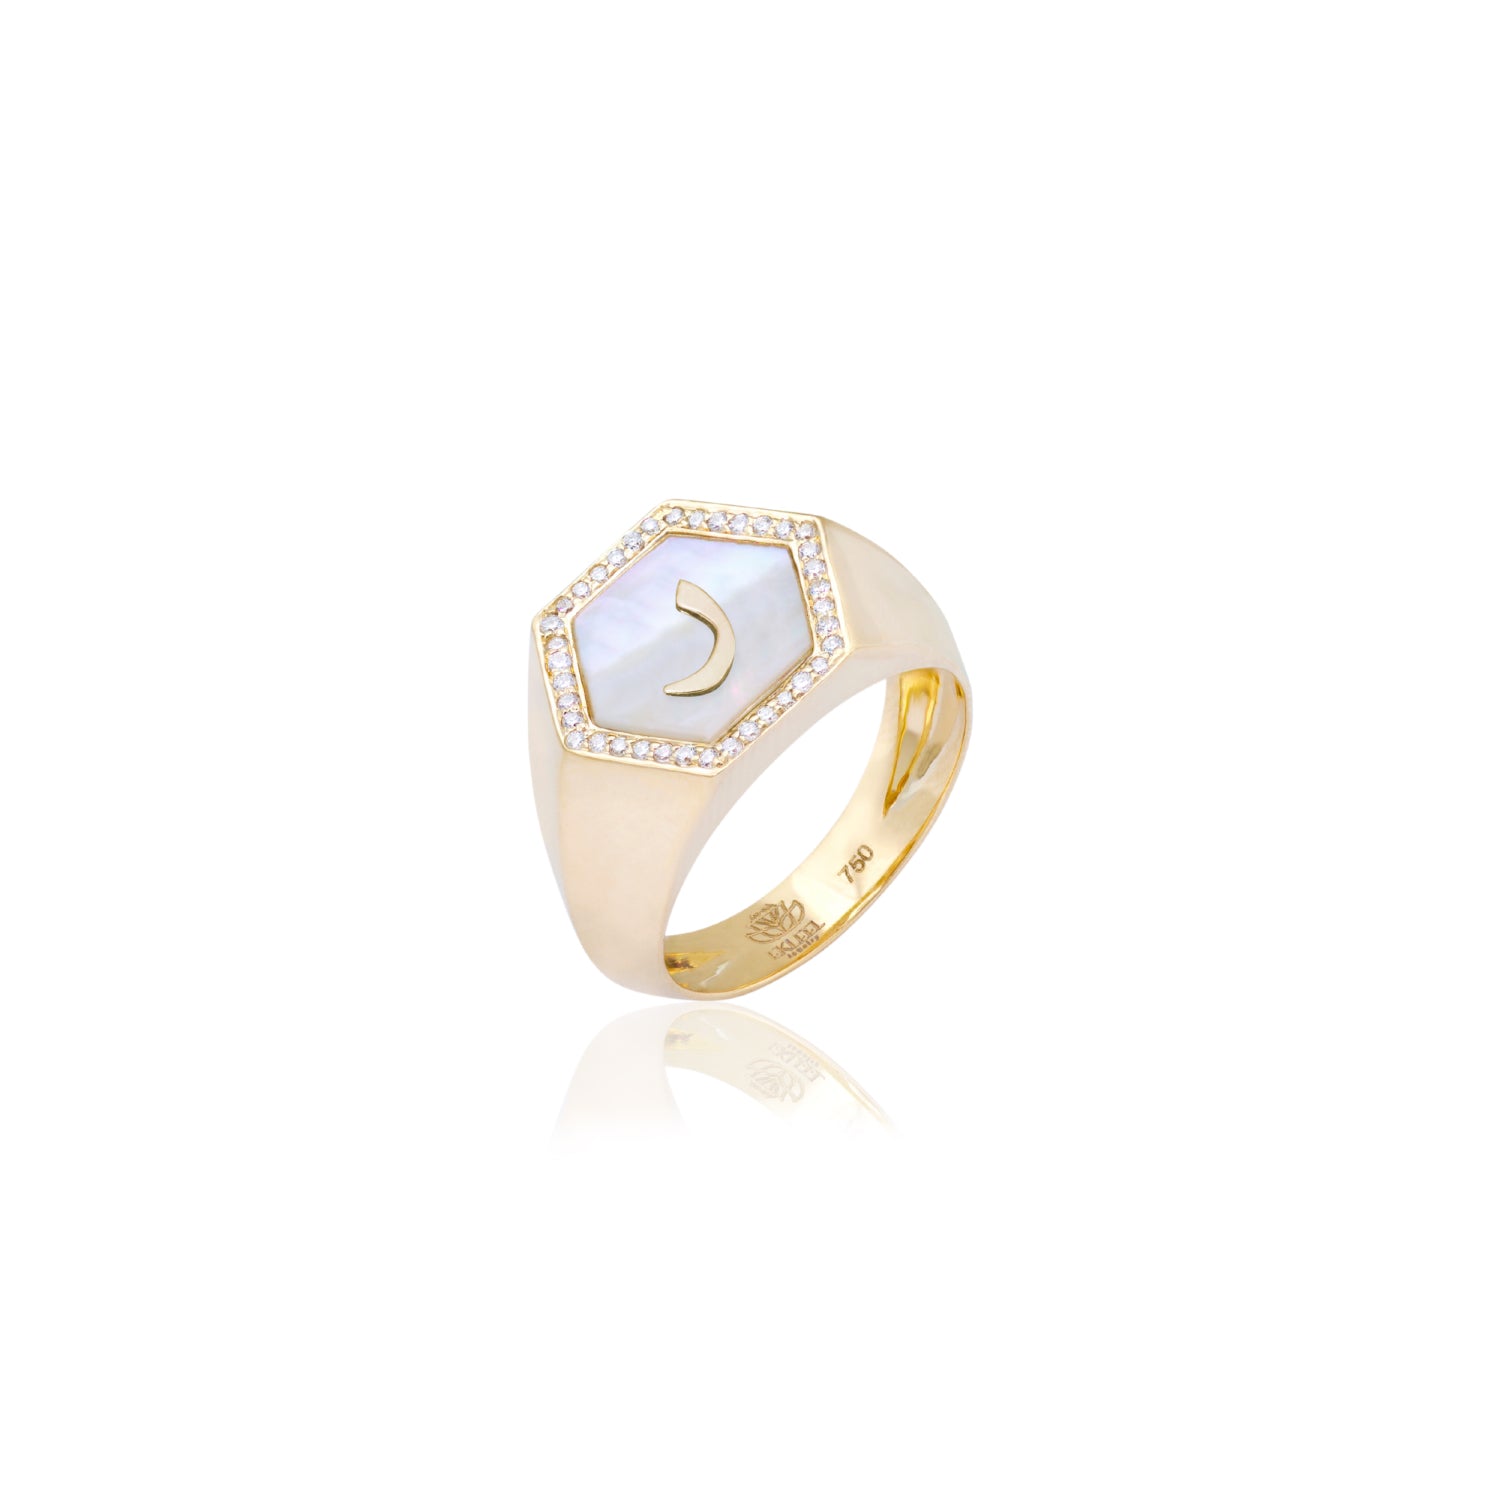 Qamoos 2.0 Letter ر White Mother of Pearl and Diamond Signet Ring in Yellow Gold